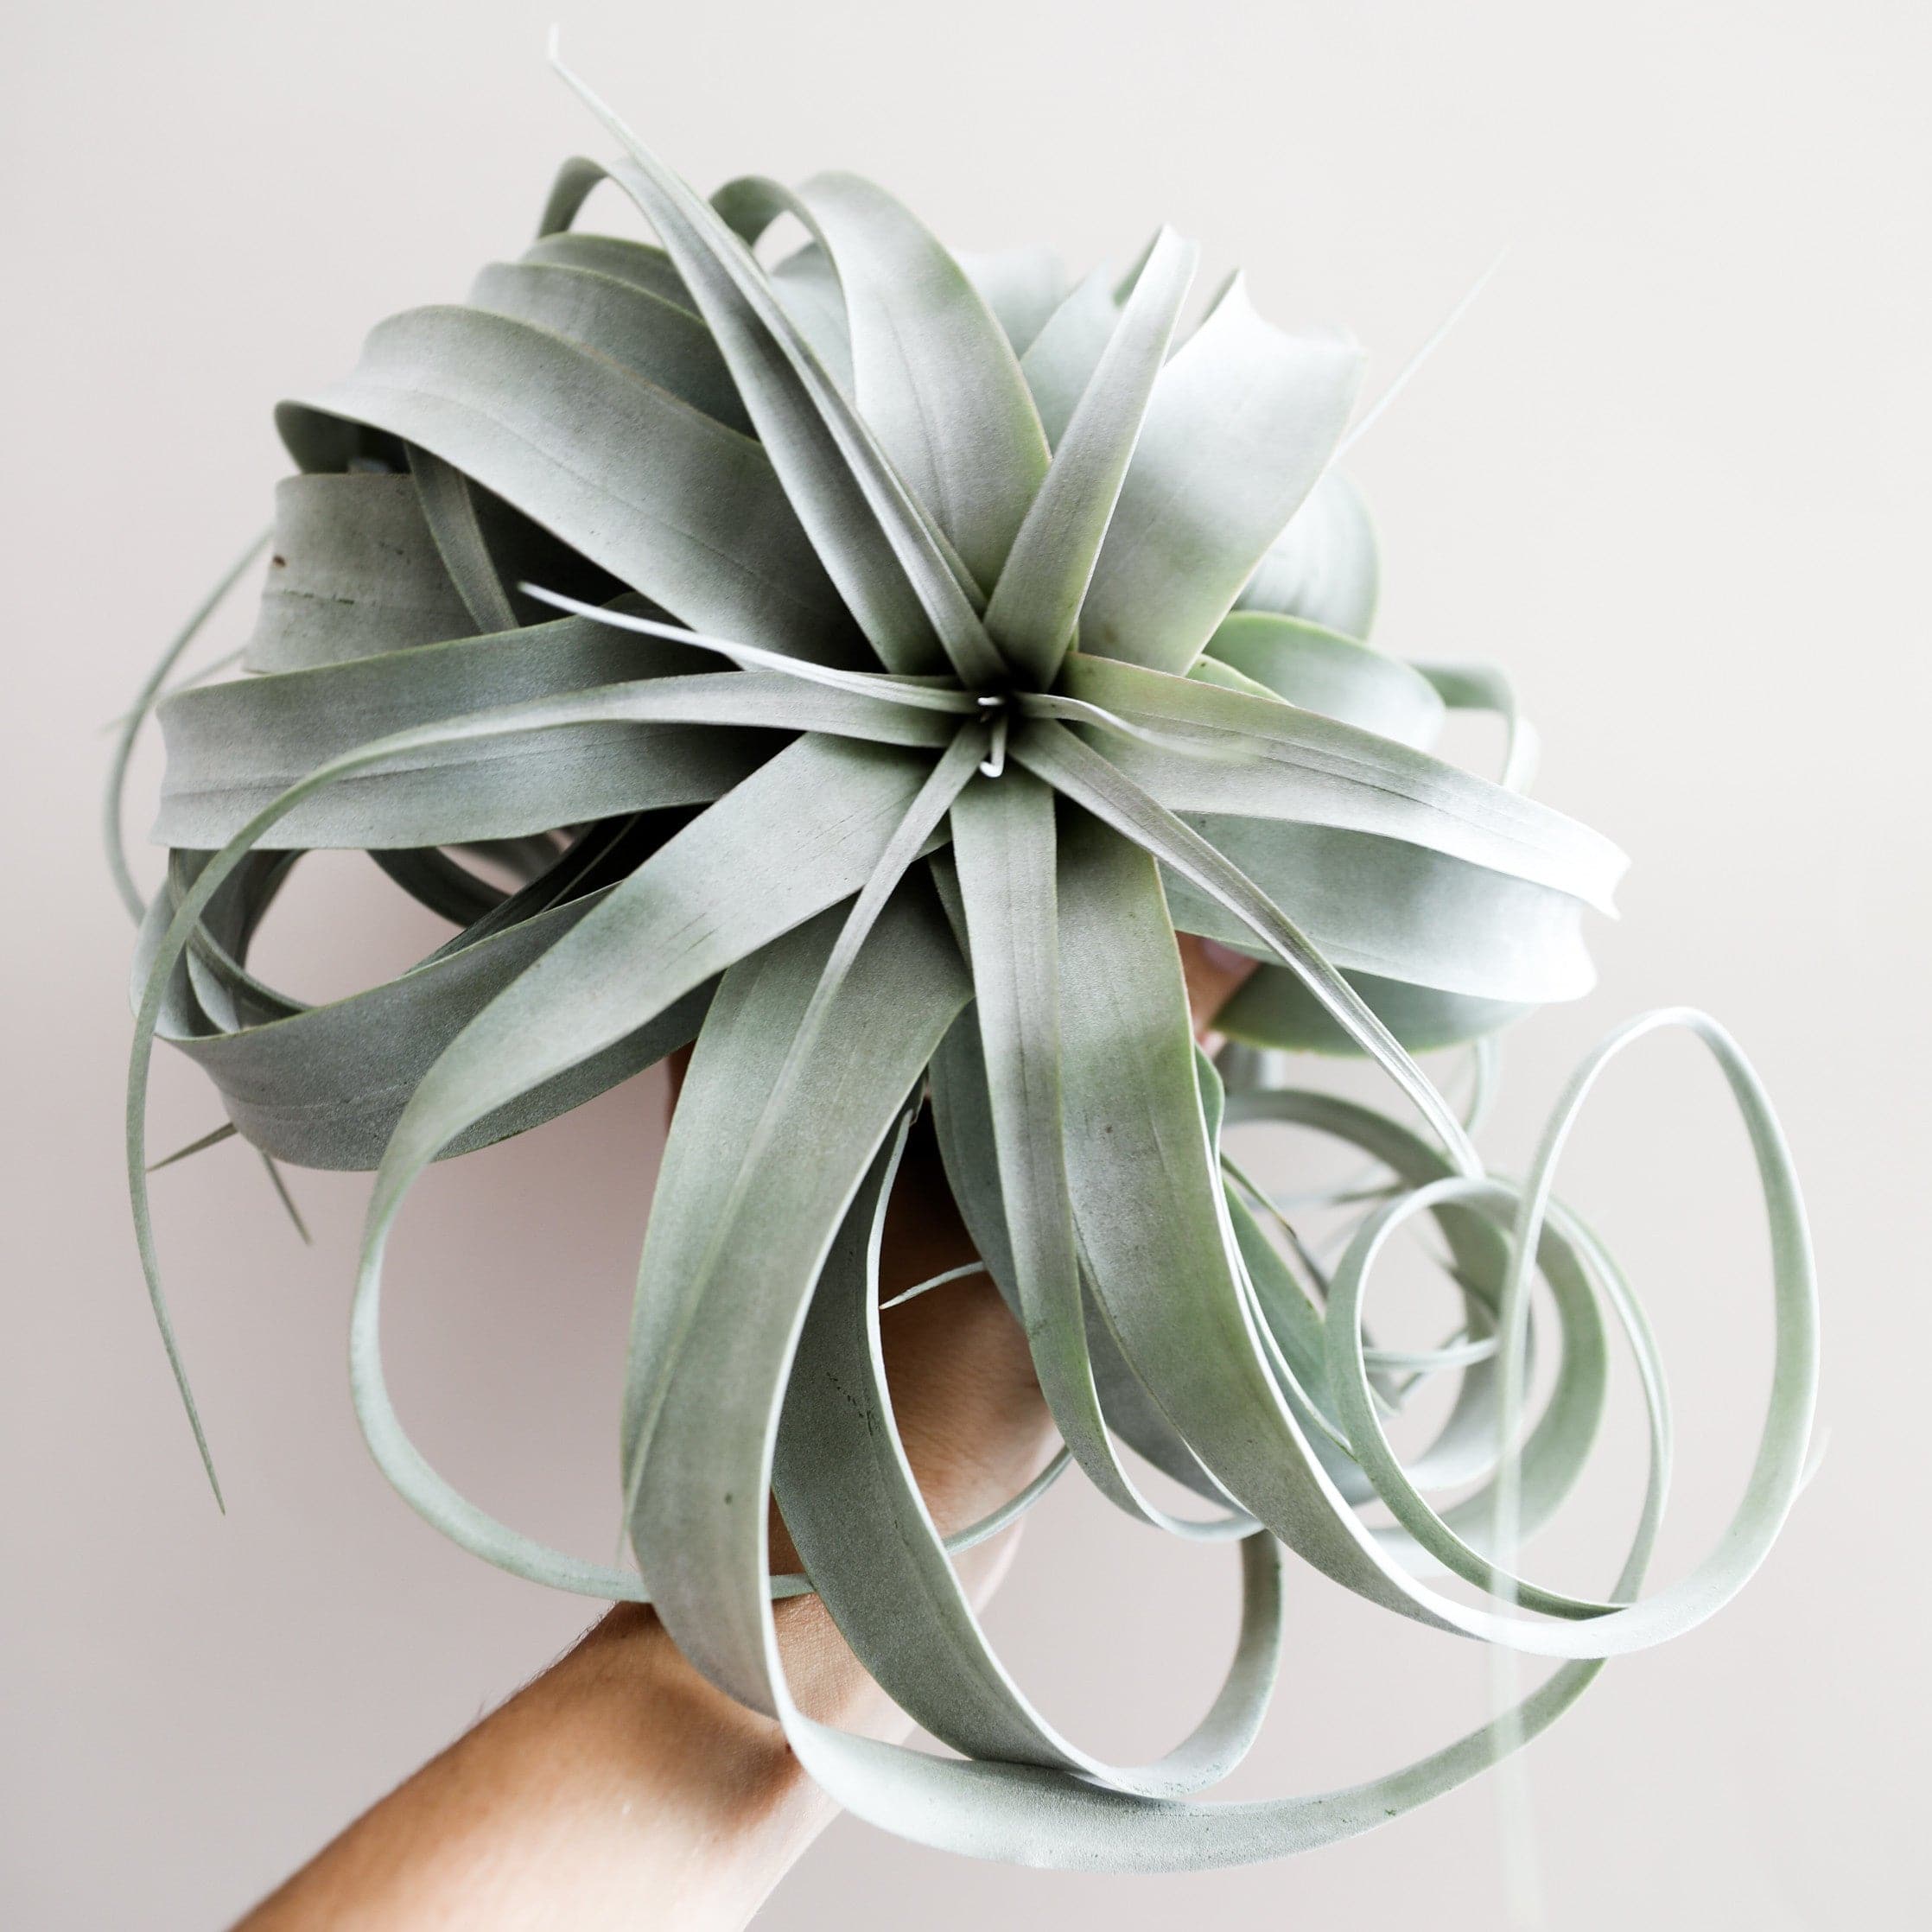 This plant has pale green and slender triangle leaves that grow in a rosette pattern with new growth coming from the center of the plant. The leaves of this plant has large whimsy leaves that curl in a spiral. 